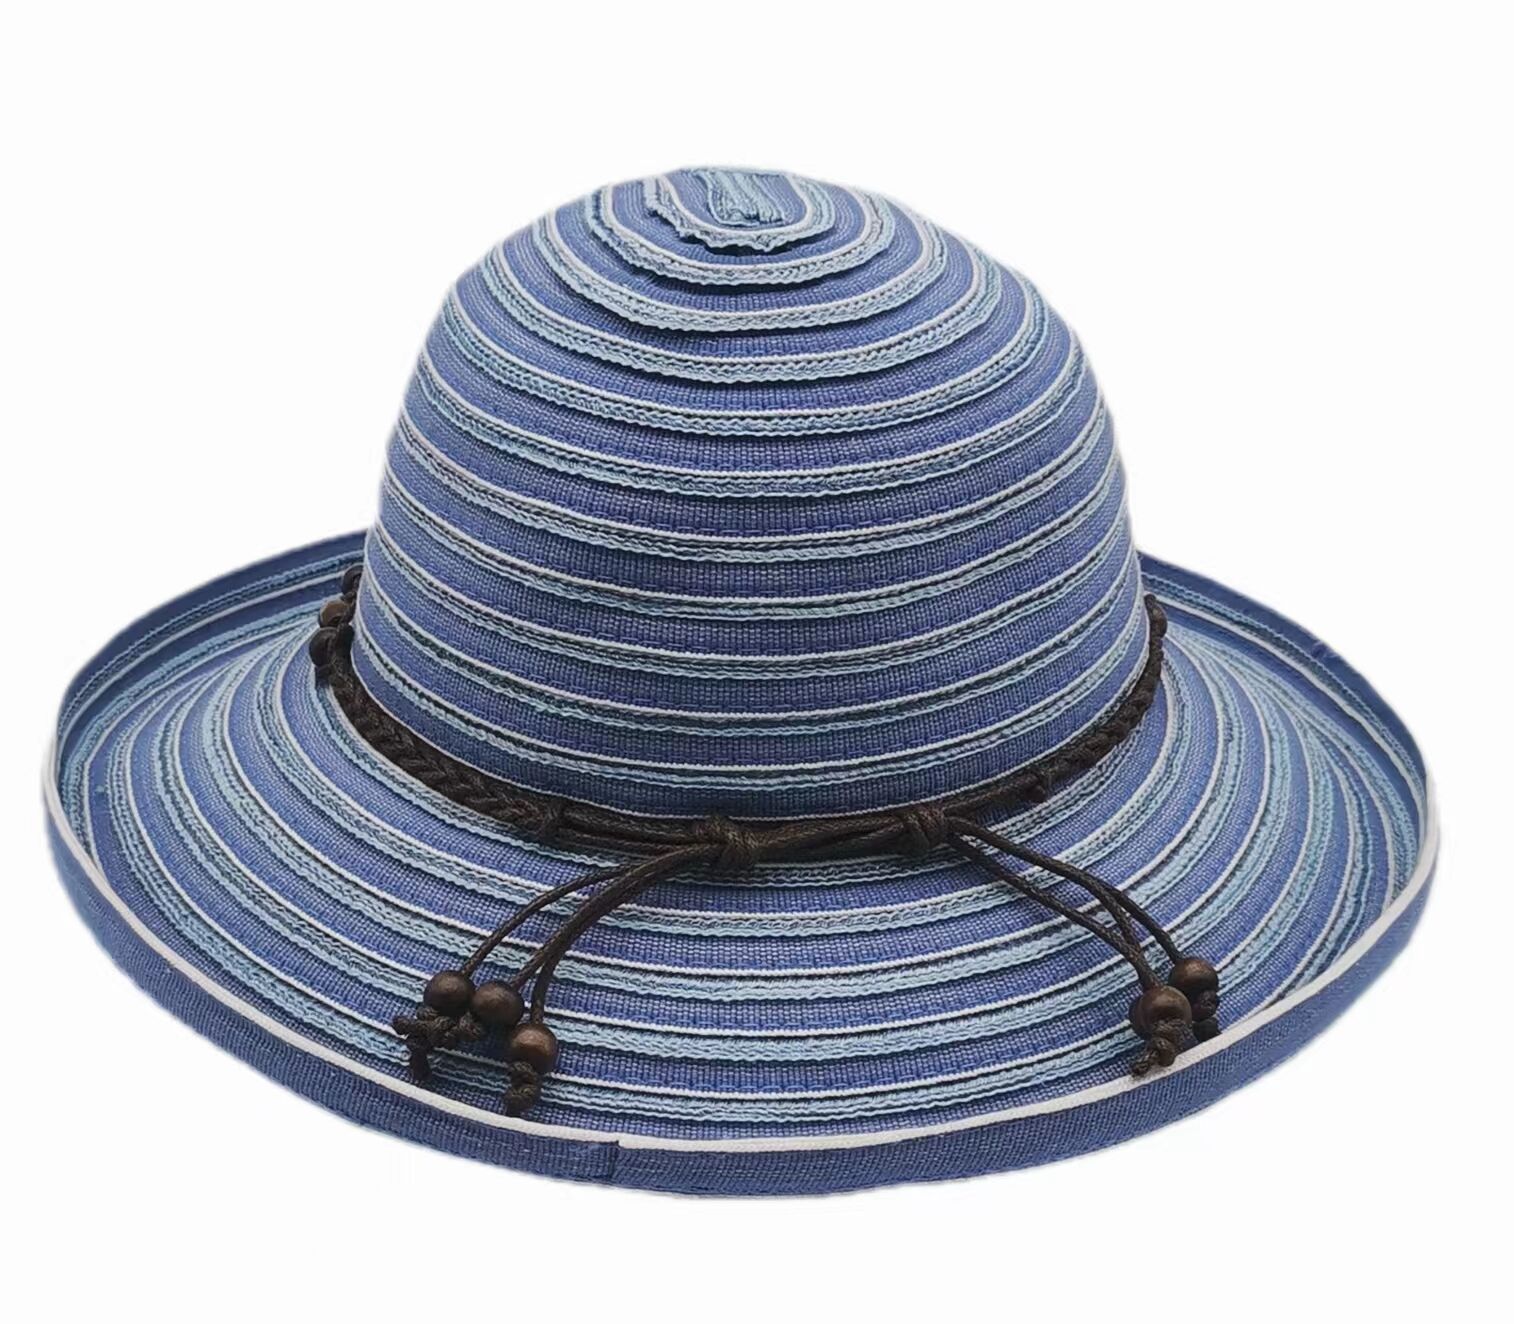 Stylish Hats To Buy Now For Sun Protection